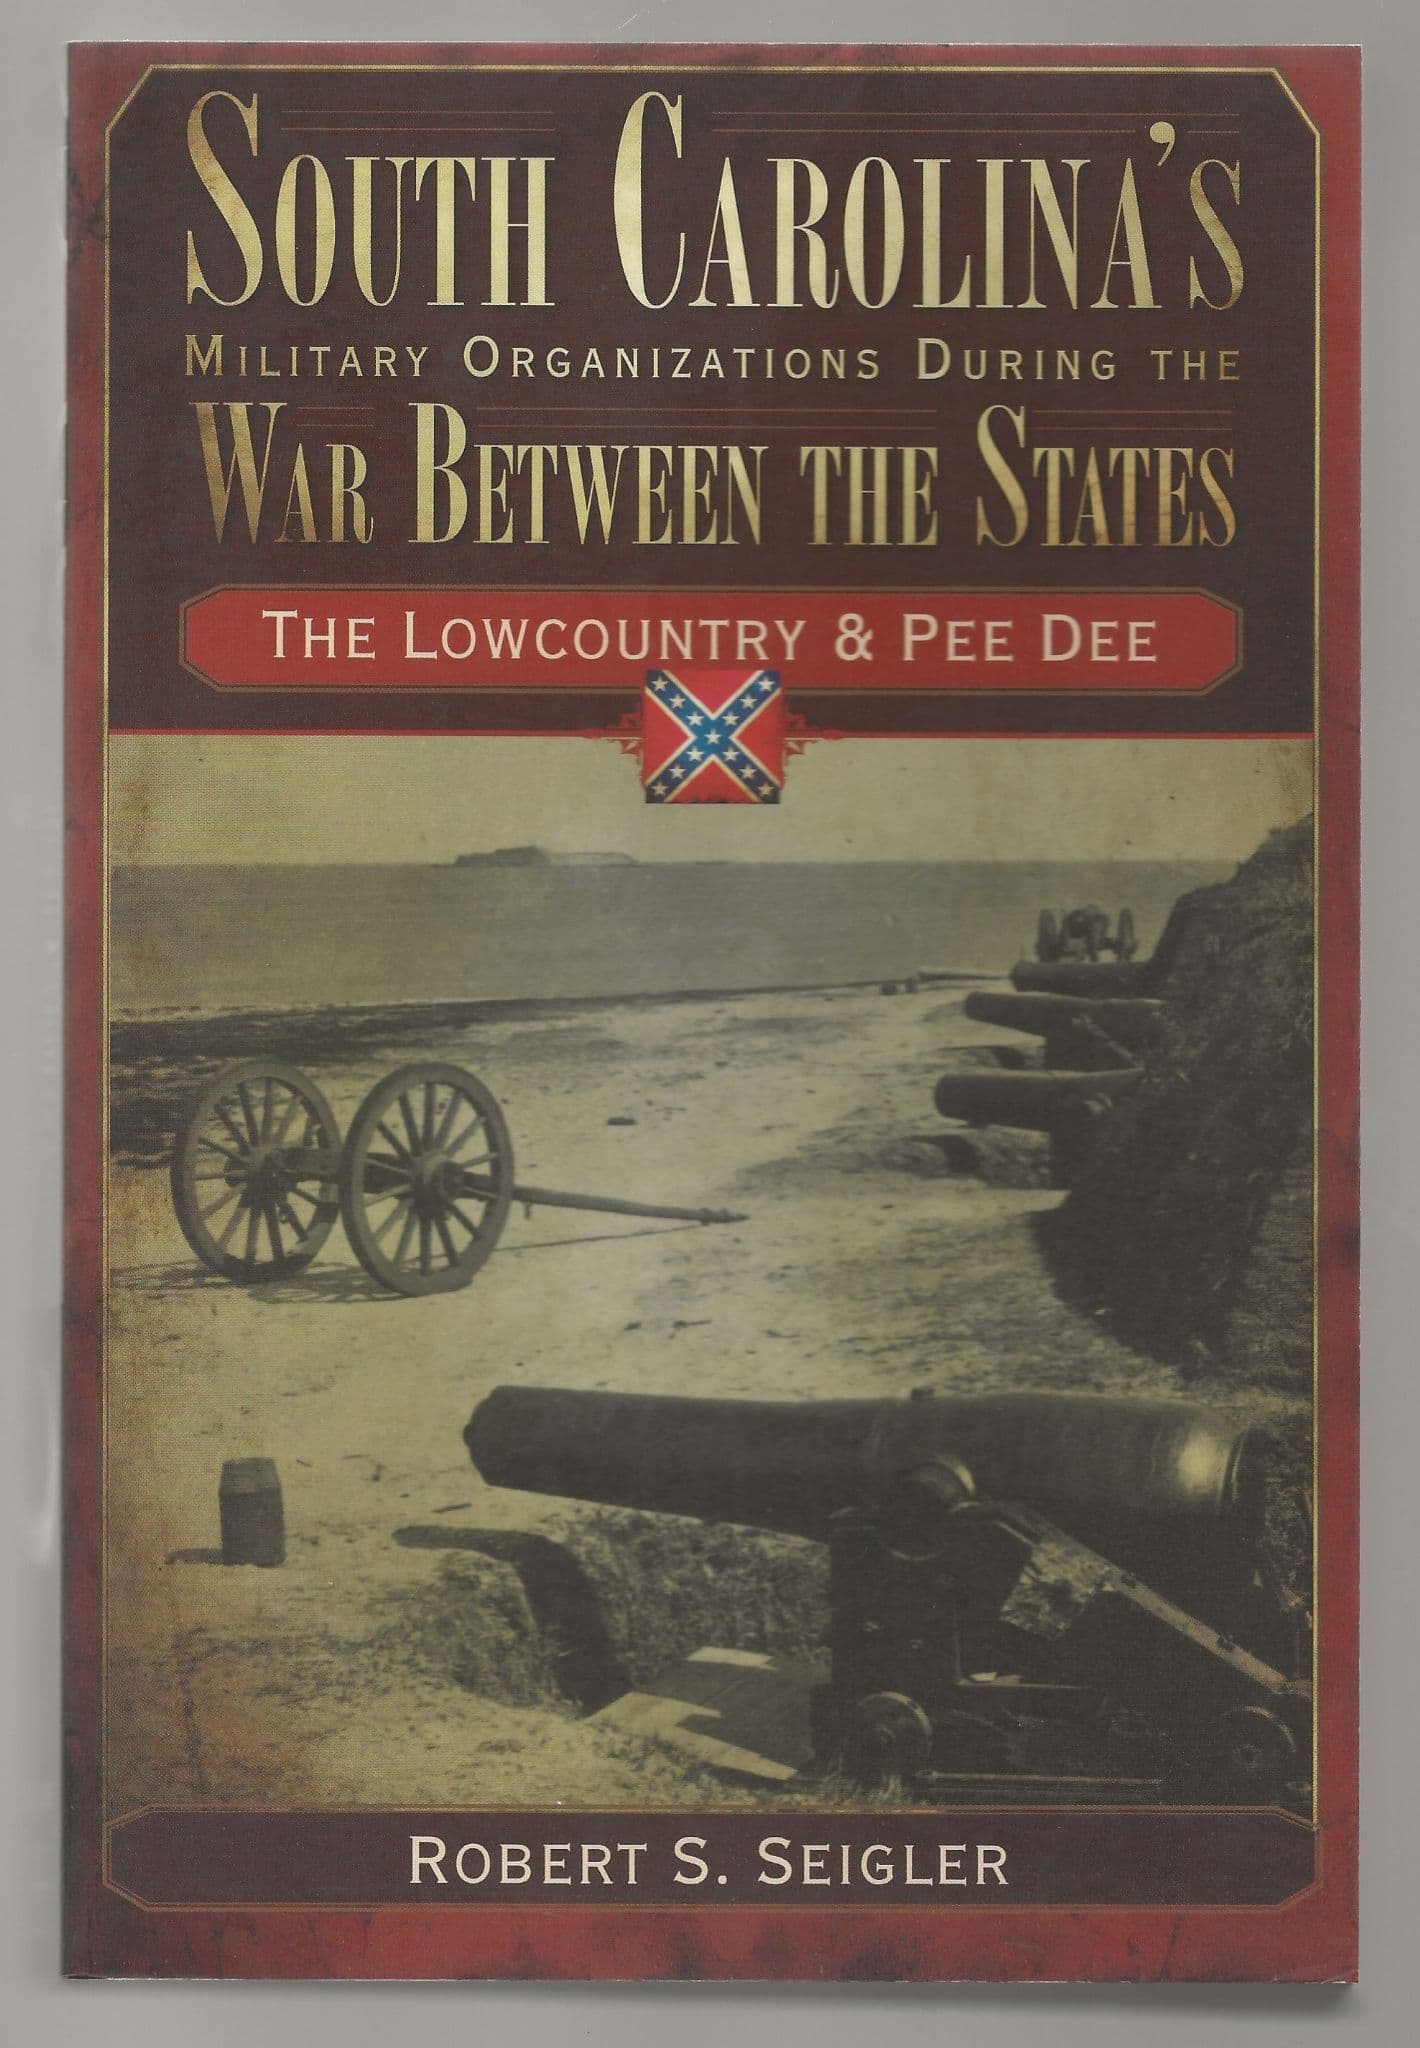 South Carolina's Military Organizations During the War between the States: The Lowcountry & Pee Dee